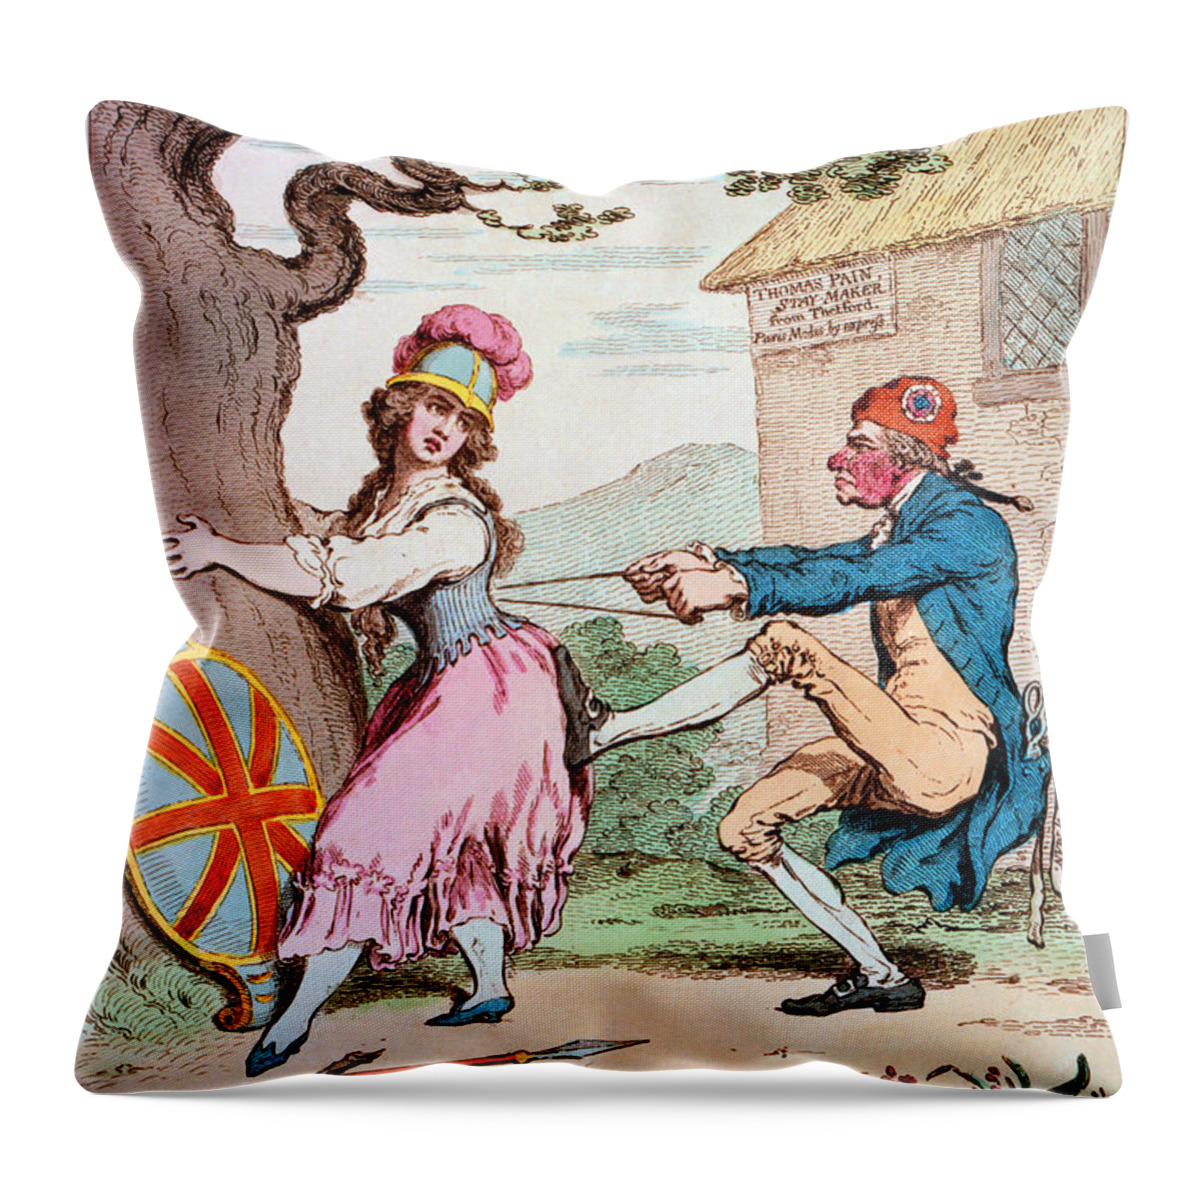 1793 Throw Pillow featuring the photograph Thomas Paine (1737-1809) #6 by Granger